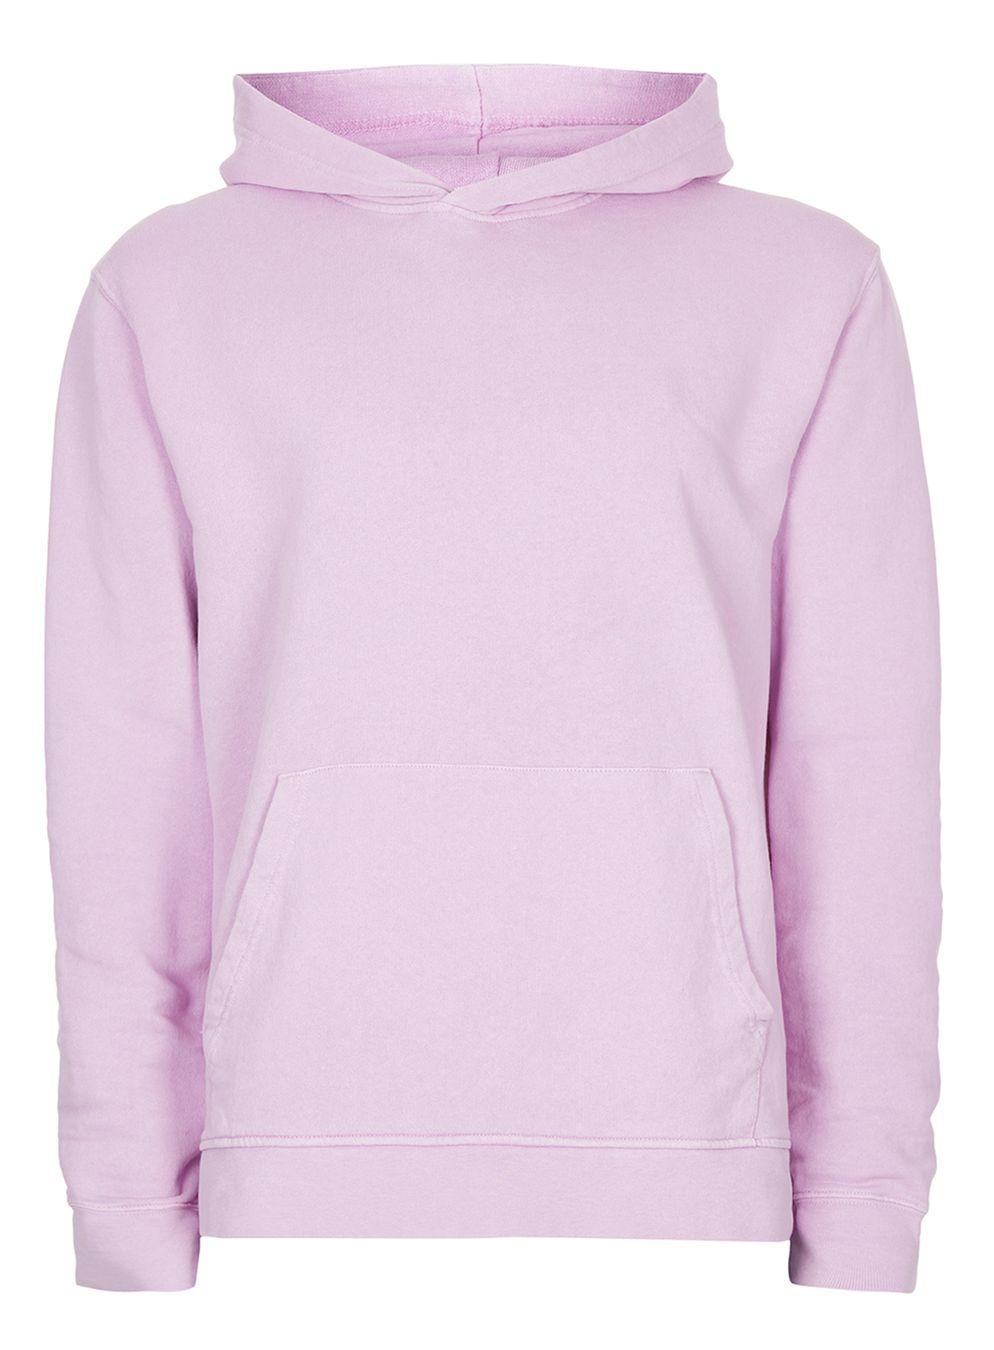 Lyst - Topman Washed Lilac Classic Fit Hoodie in Purple for Men